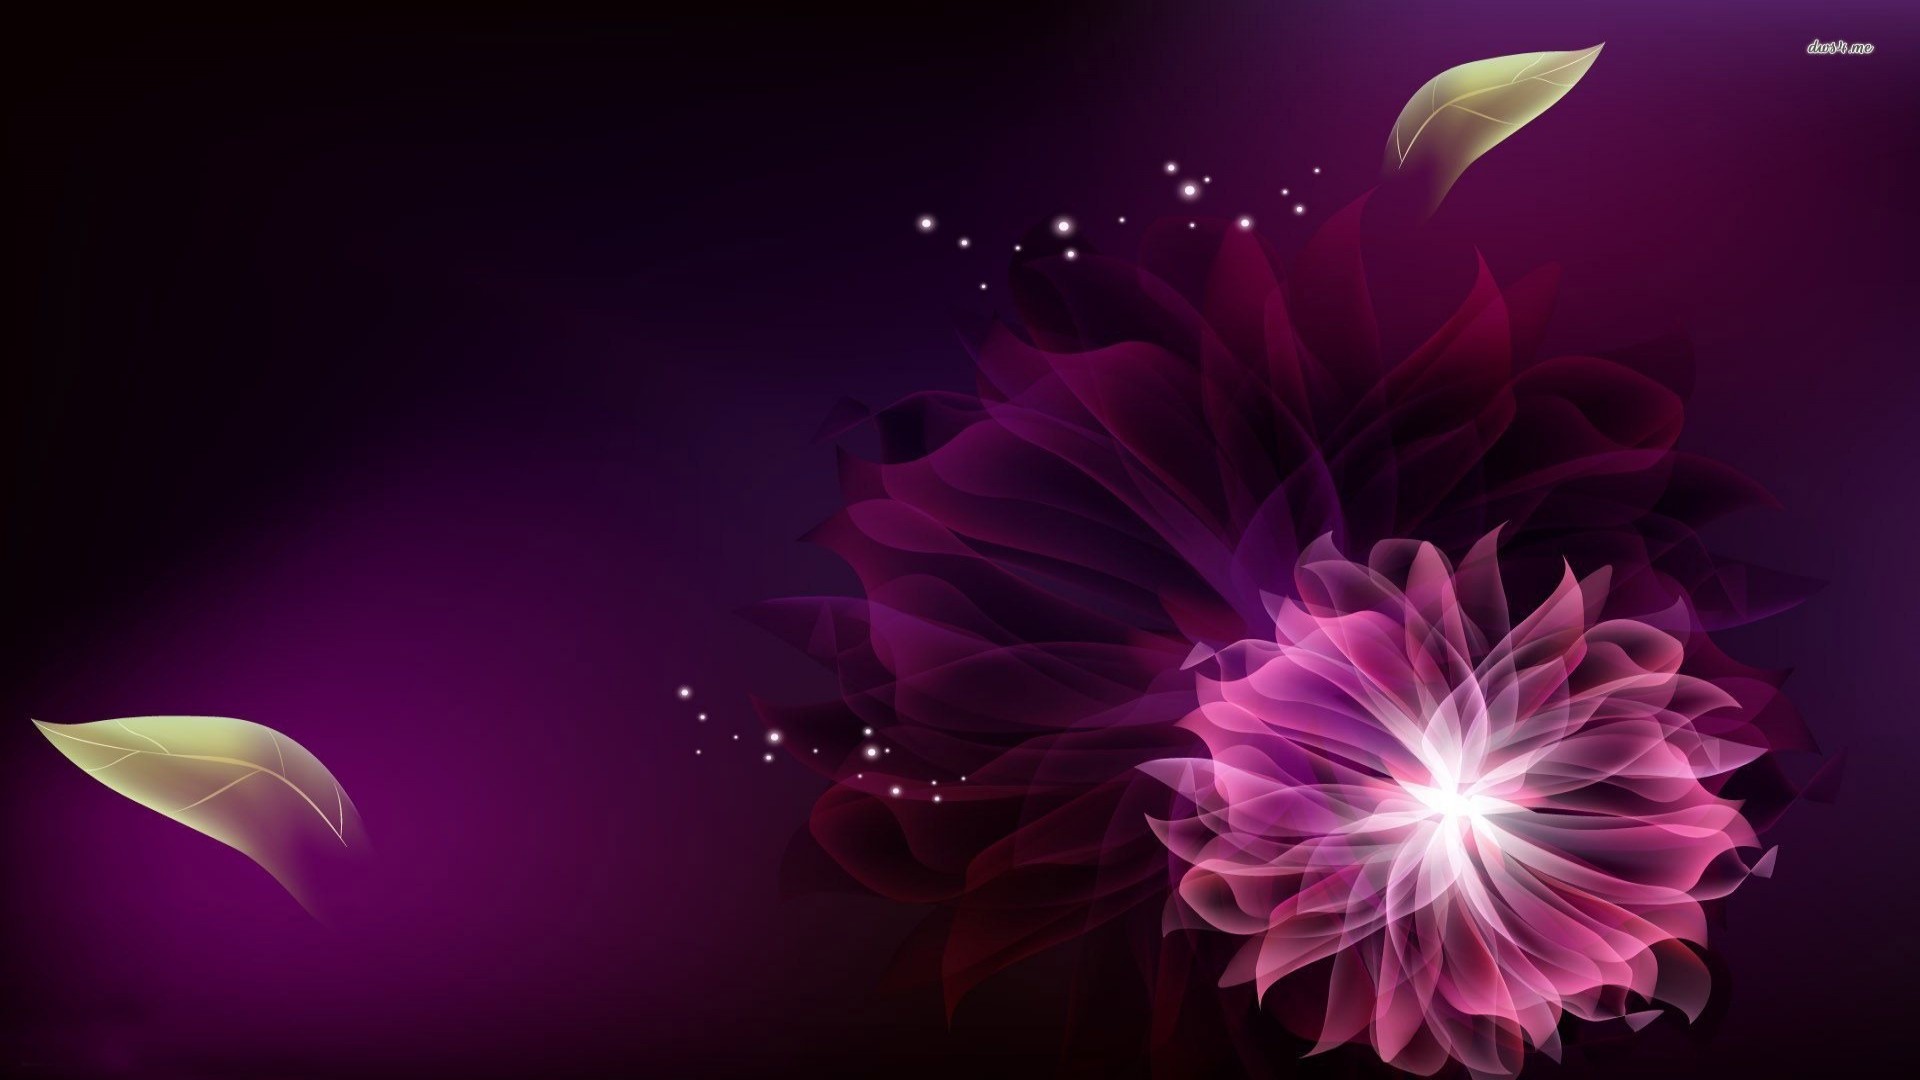 1920x1080 Floral Wallpaper With Black Background 6 Free Hd Wallpaper